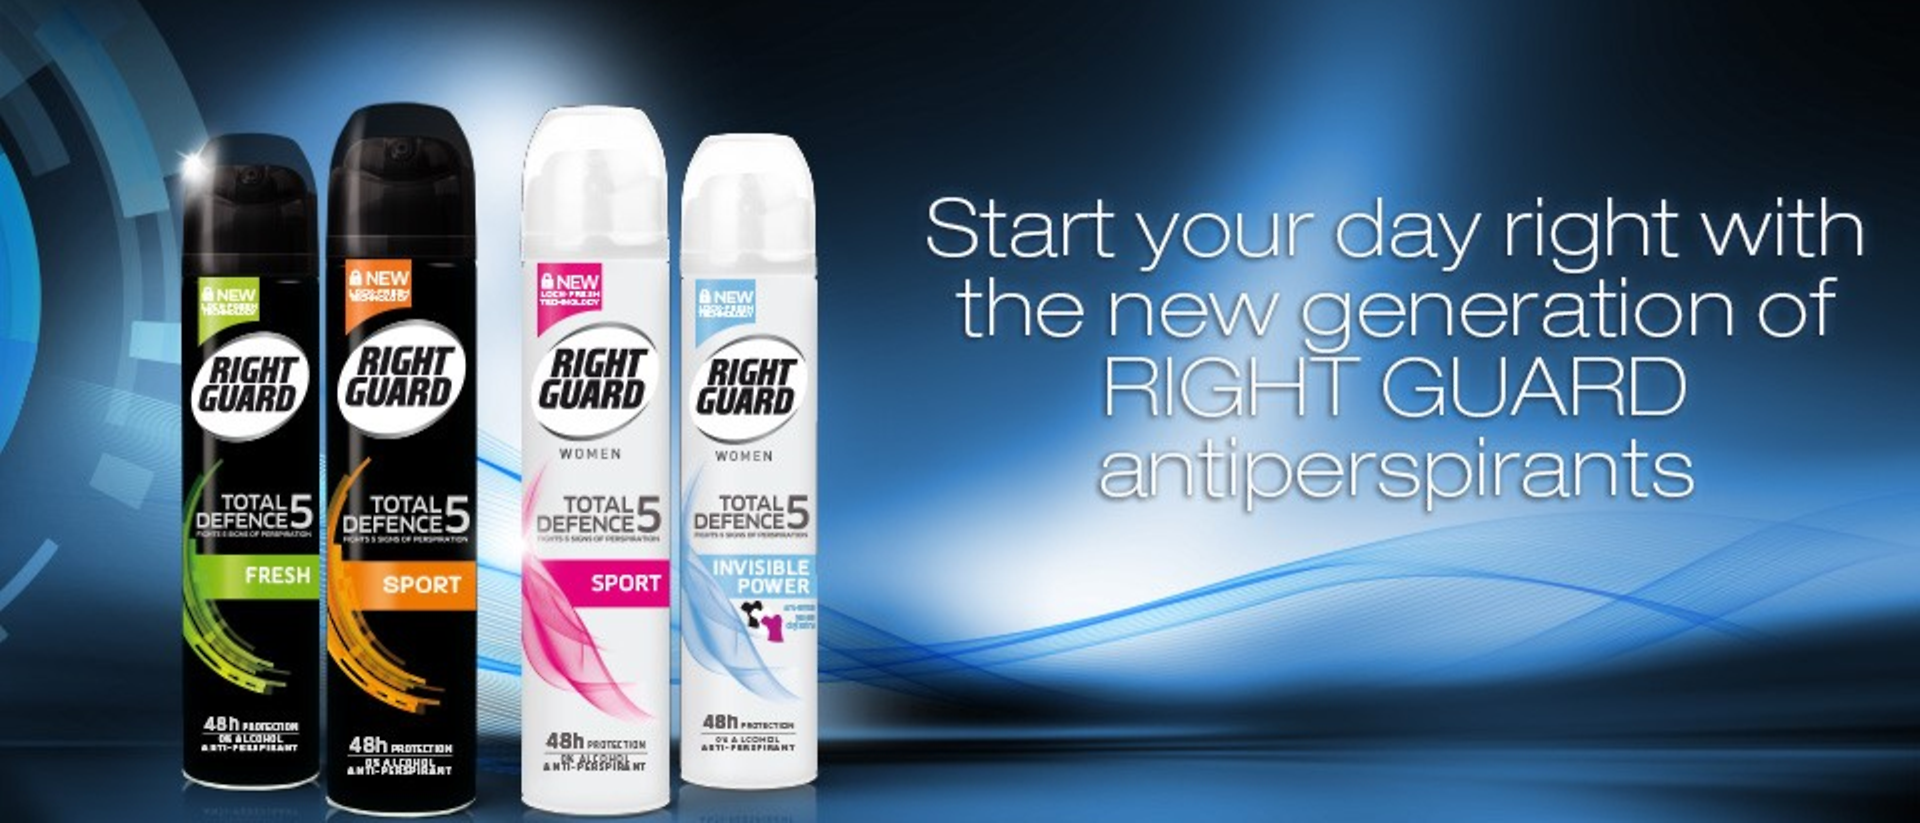 

The Total Defence 5 line of Right Guard antiperspirant deodorants has been developed to fight the 5 signs of perspiration: odor, wetness, stickiness, bacteria and stains.